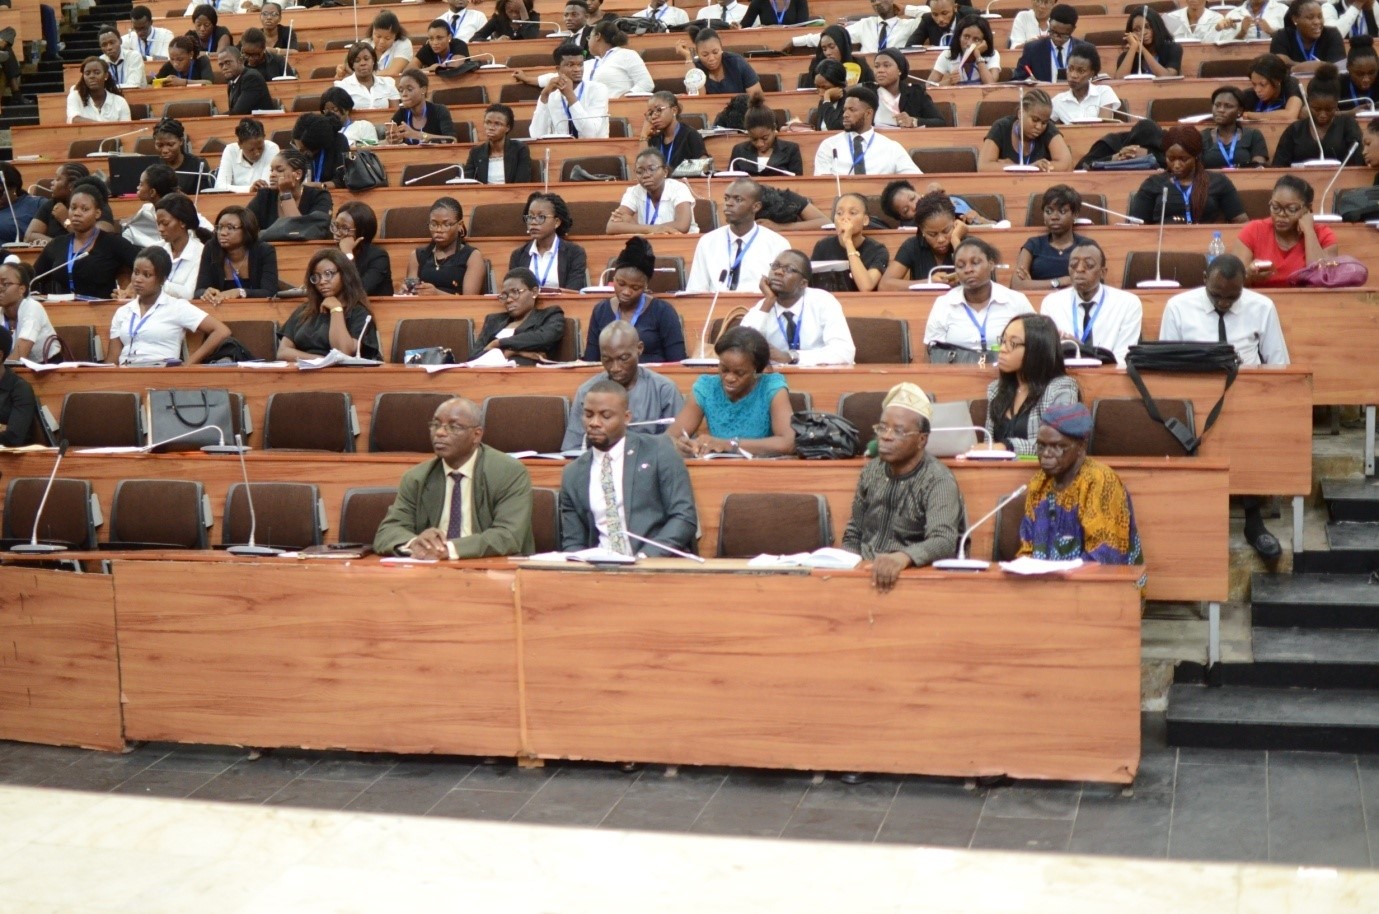 Cross-section of students and attendees